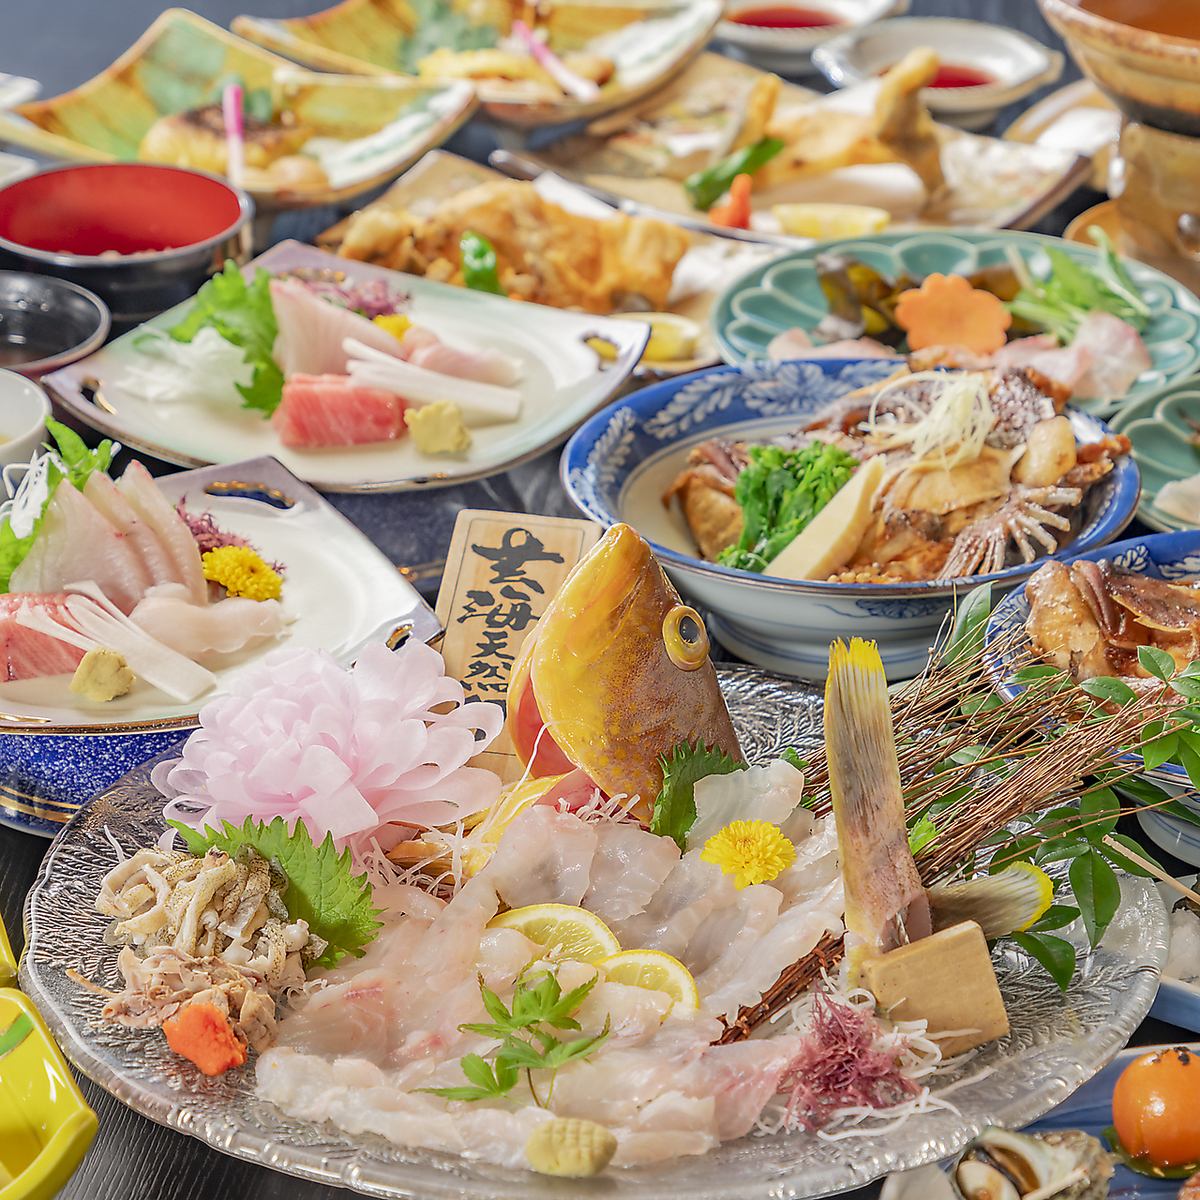 Please enjoy our proud dishes made with plenty of seafood from the Genkai Sea!